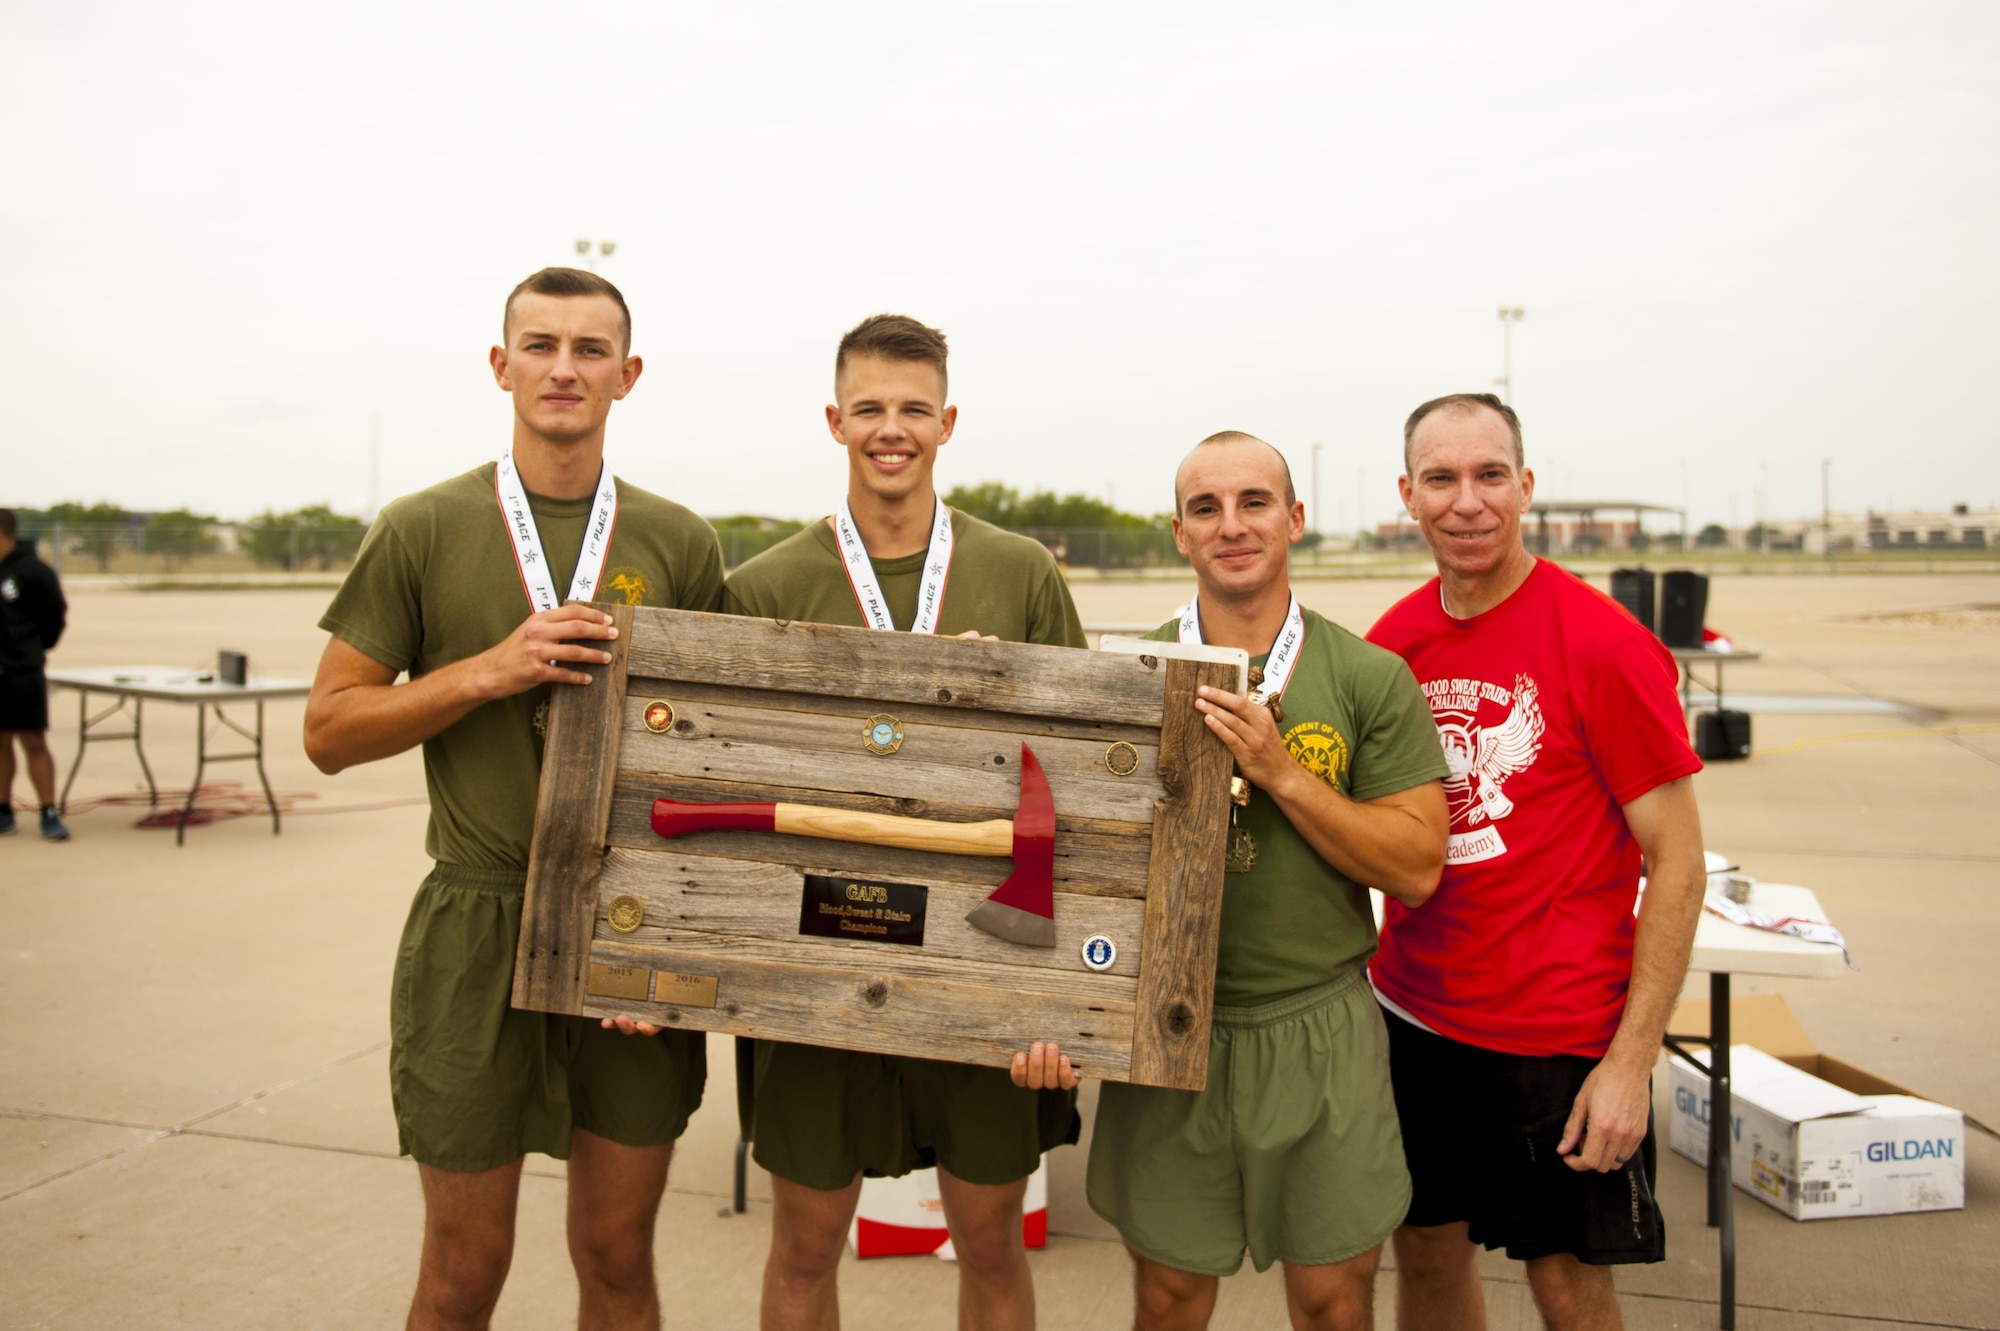 U.S. Marine Corps Lance Cpl. Zane Reece, Pfc. Christian Gender and Pfc. Tyler Mogul, 312th Training Squadron trainees, receive the first place plaque from U.S. Air Force Lt. Col. Scott Cline, 312th TRS commander, for winning the fourth annual Blood, Sweat and Stairs event at the Louis F. Garland Department of Defense Fire Academy on Goodfellow Air Force Base, Texas, Sept. 30, 2017. Each person competed on a team of three; the fastest won the event. (U.S. Air Force photo by Senior Airman Scott Jackson/Released)